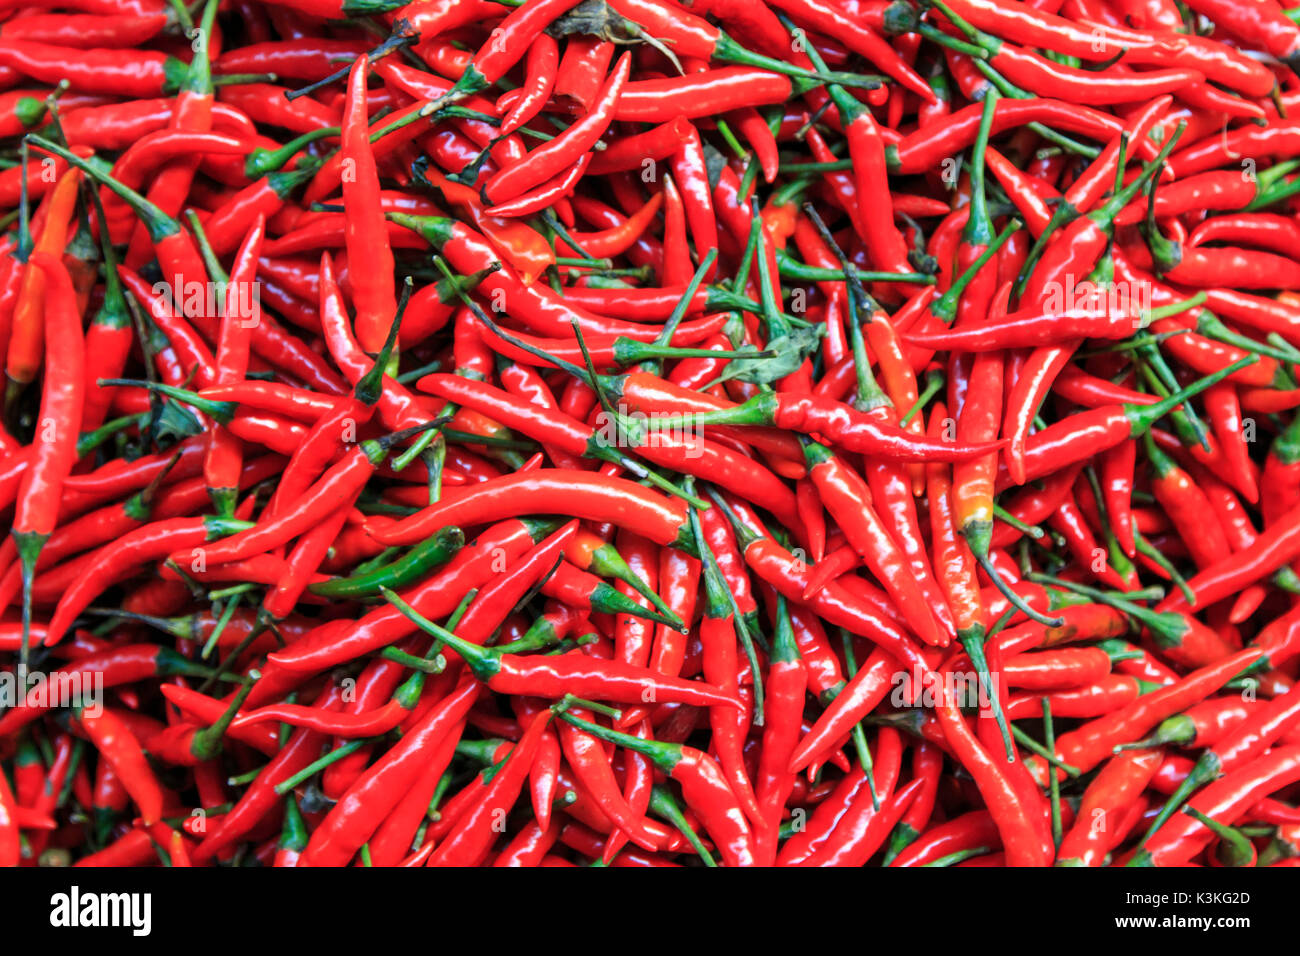 Red Chili peppers close up Stock Photo